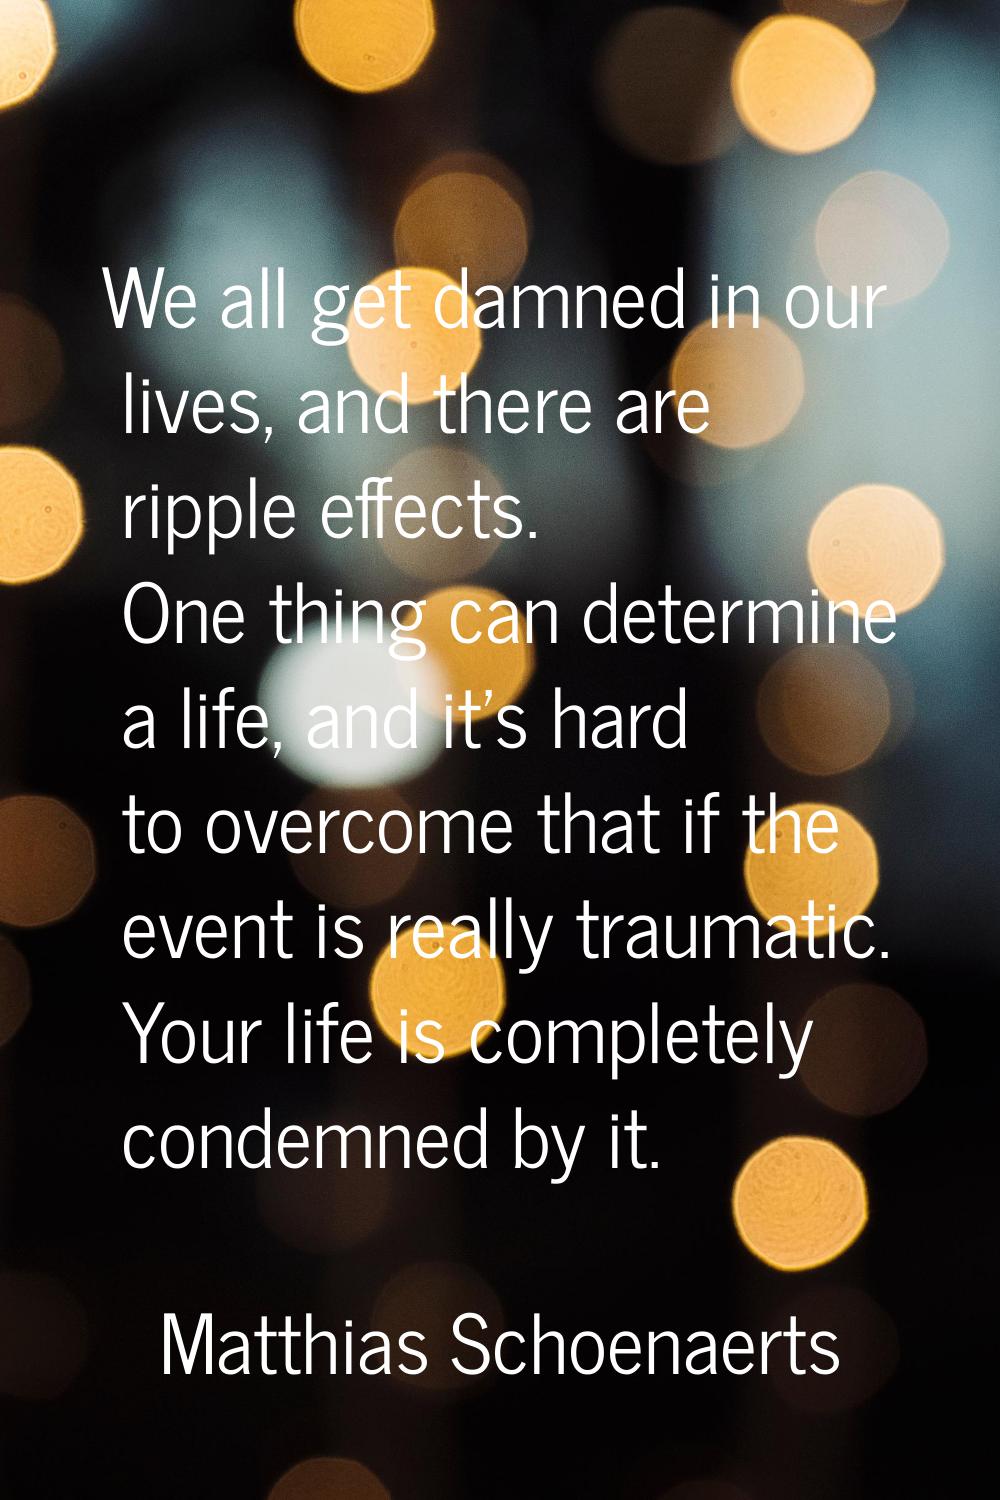 We all get damned in our lives, and there are ripple effects. One thing can determine a life, and i